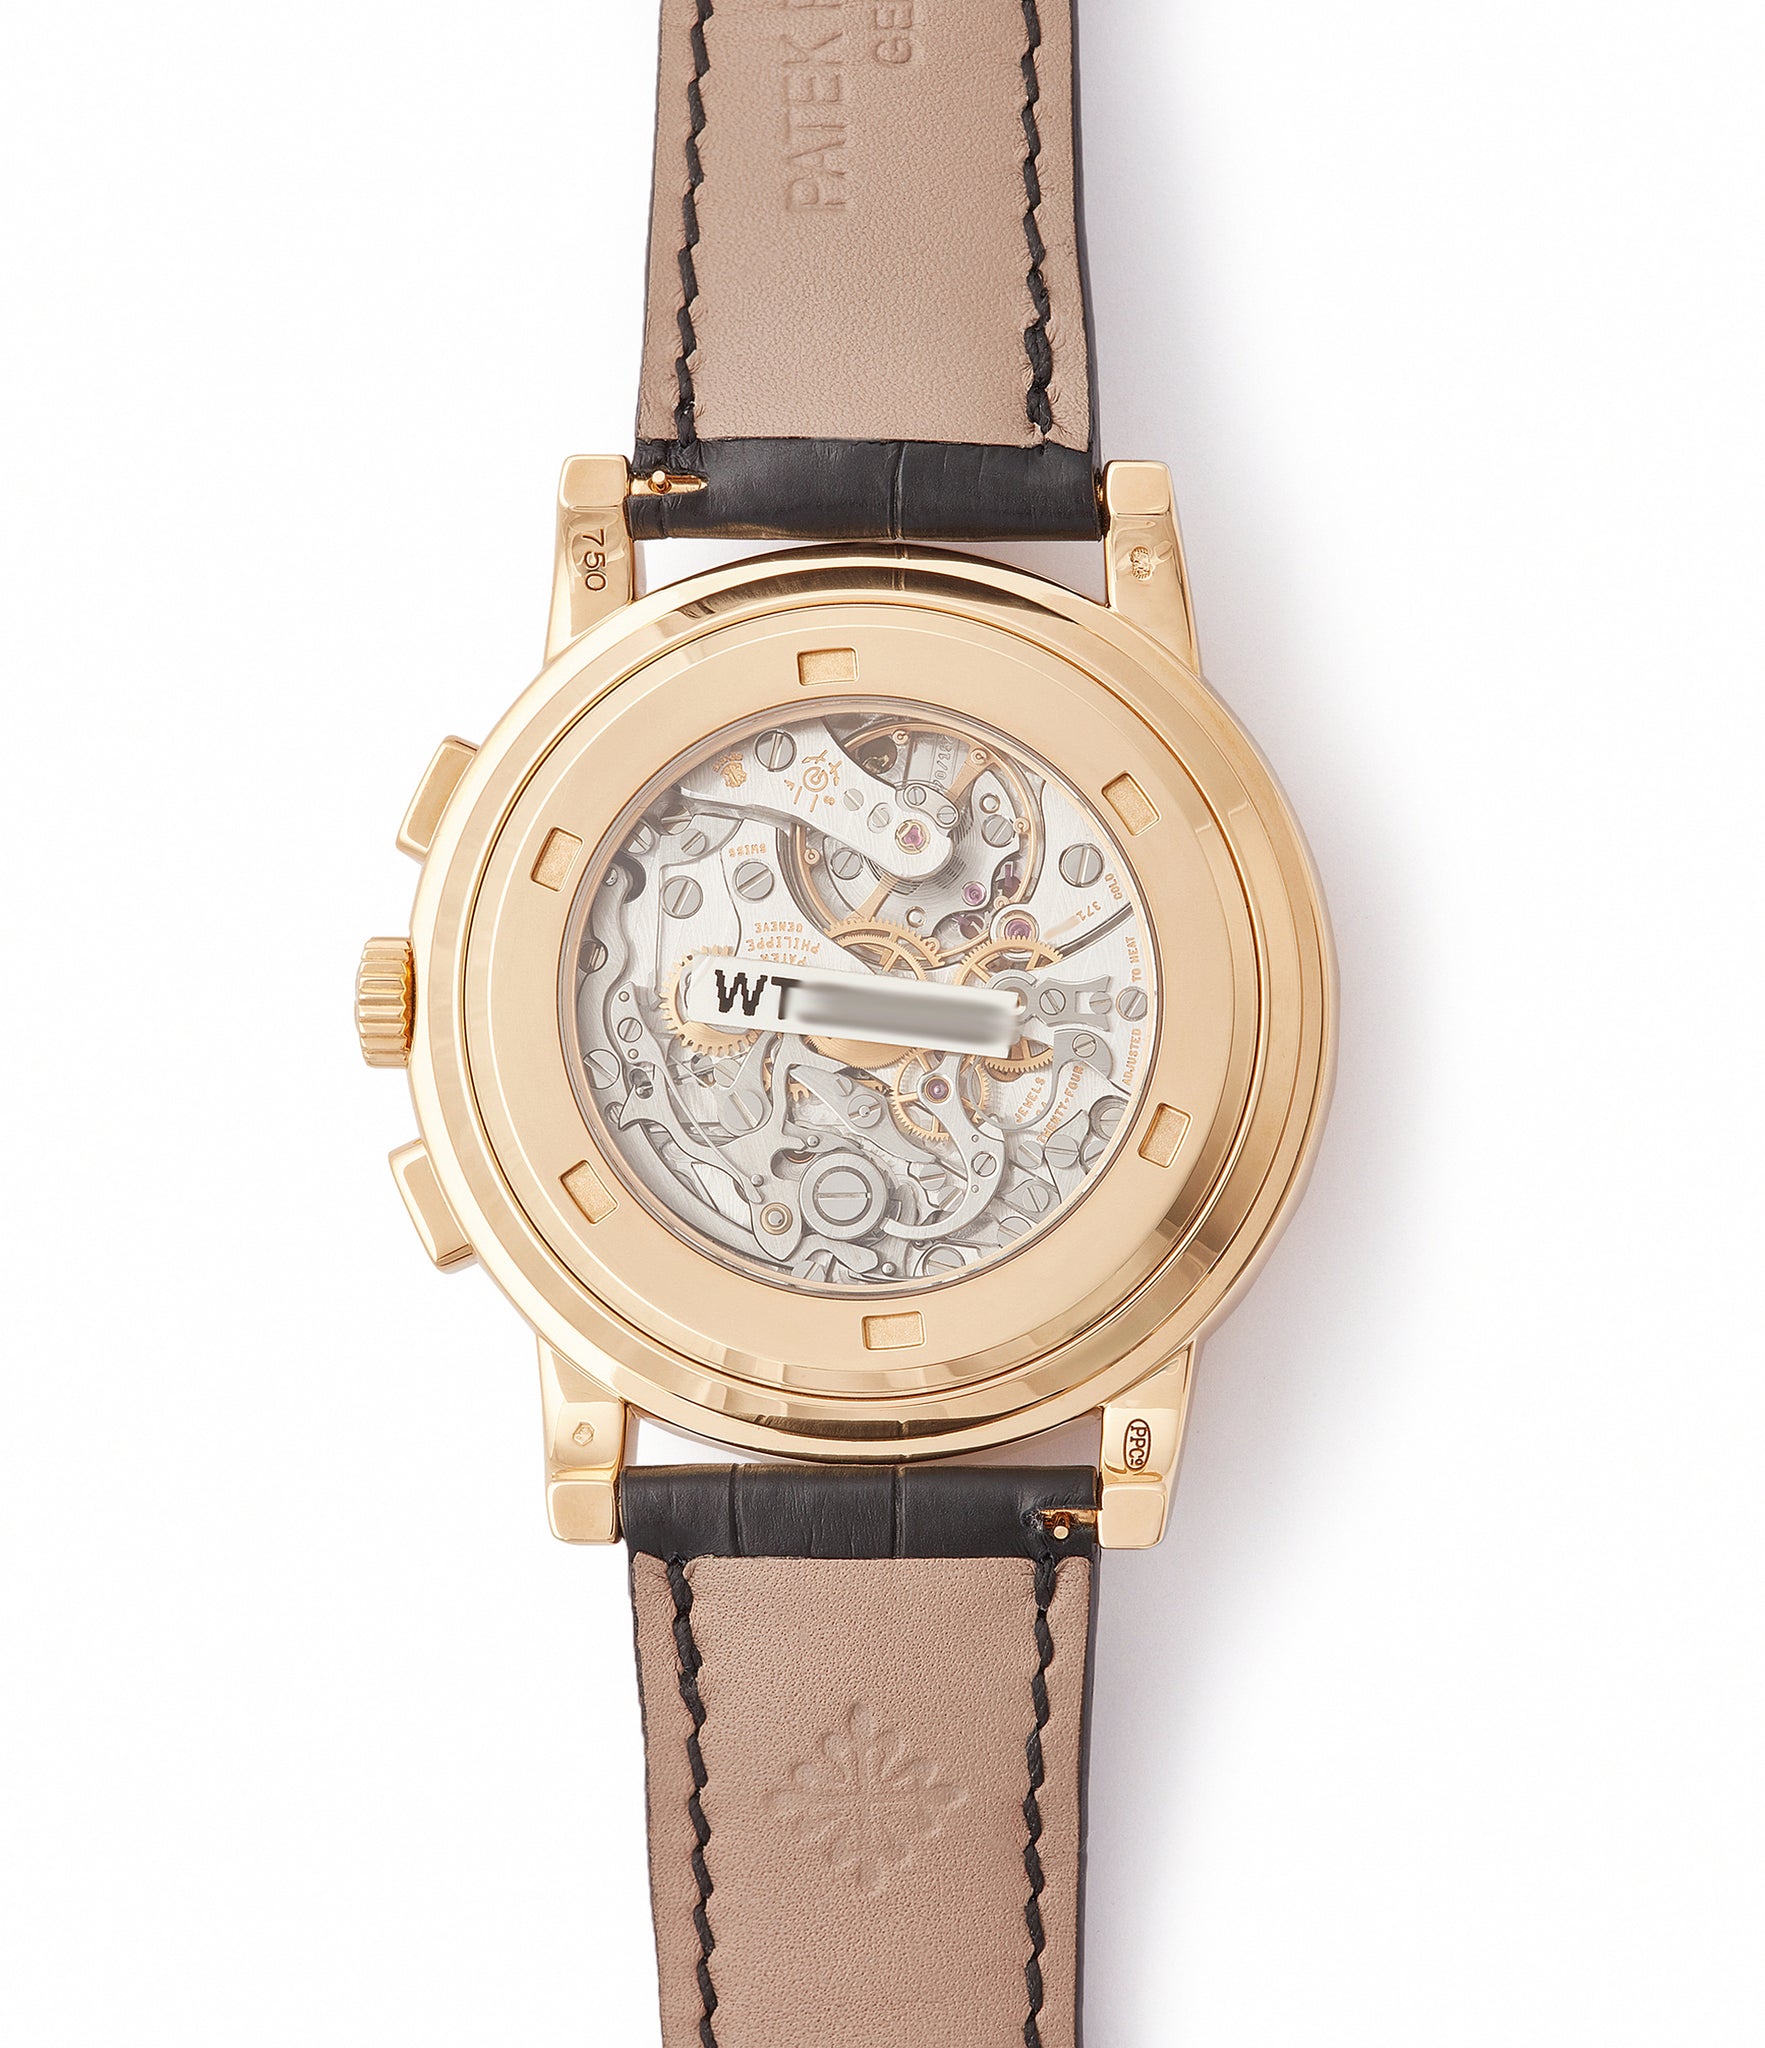 manual-winding Patek Philippe 5070J-012 Saatchi Edition Chronograph brown dial yellow gold watch for sale online at A Collected Man London UK specialist of rare watches